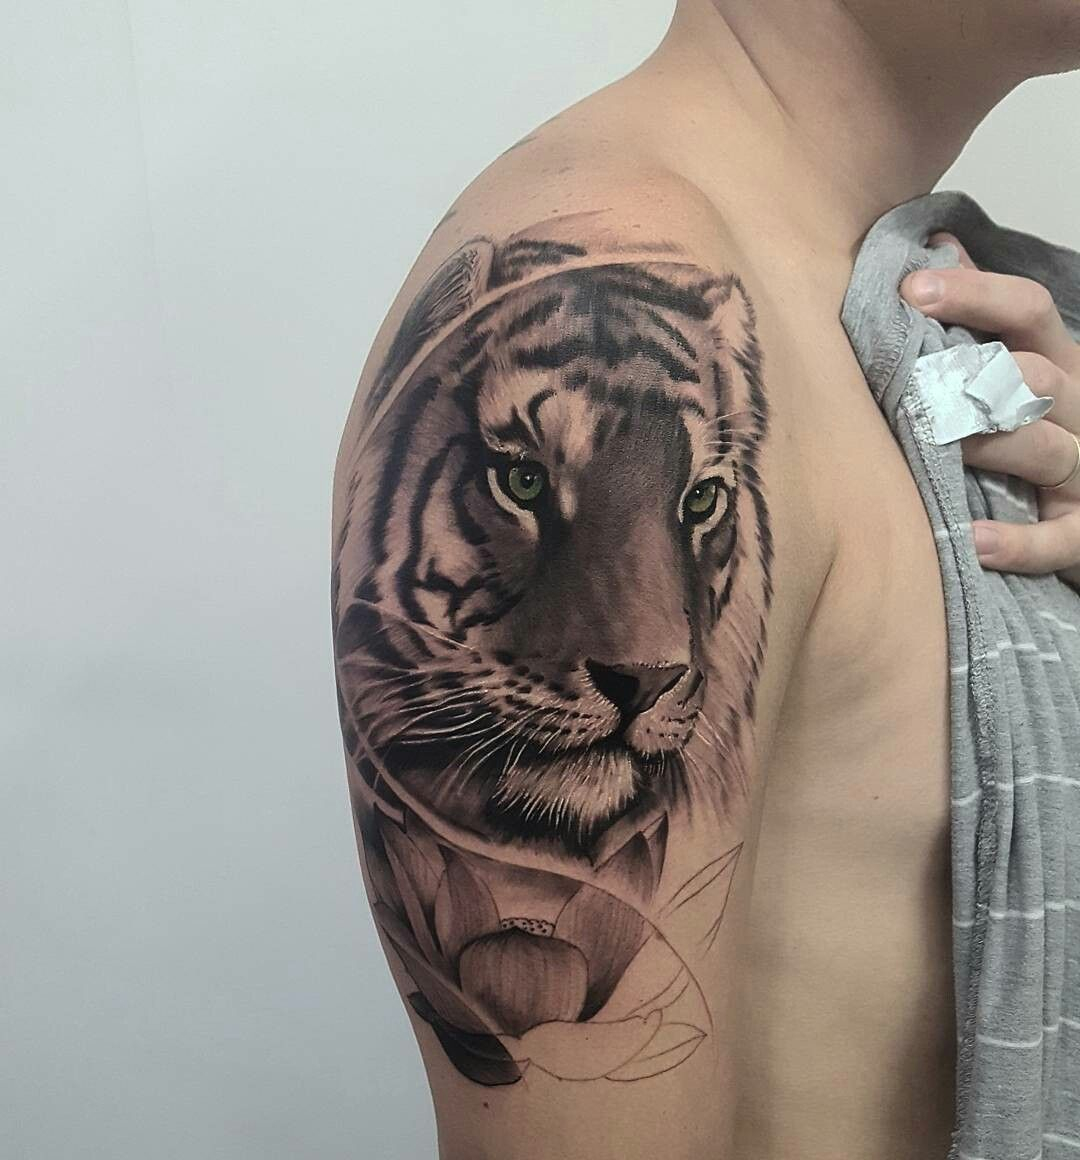 Tiger Shoulder Tattoo National Animal Of Korea Body Art In 2019 throughout size 1080 X 1160